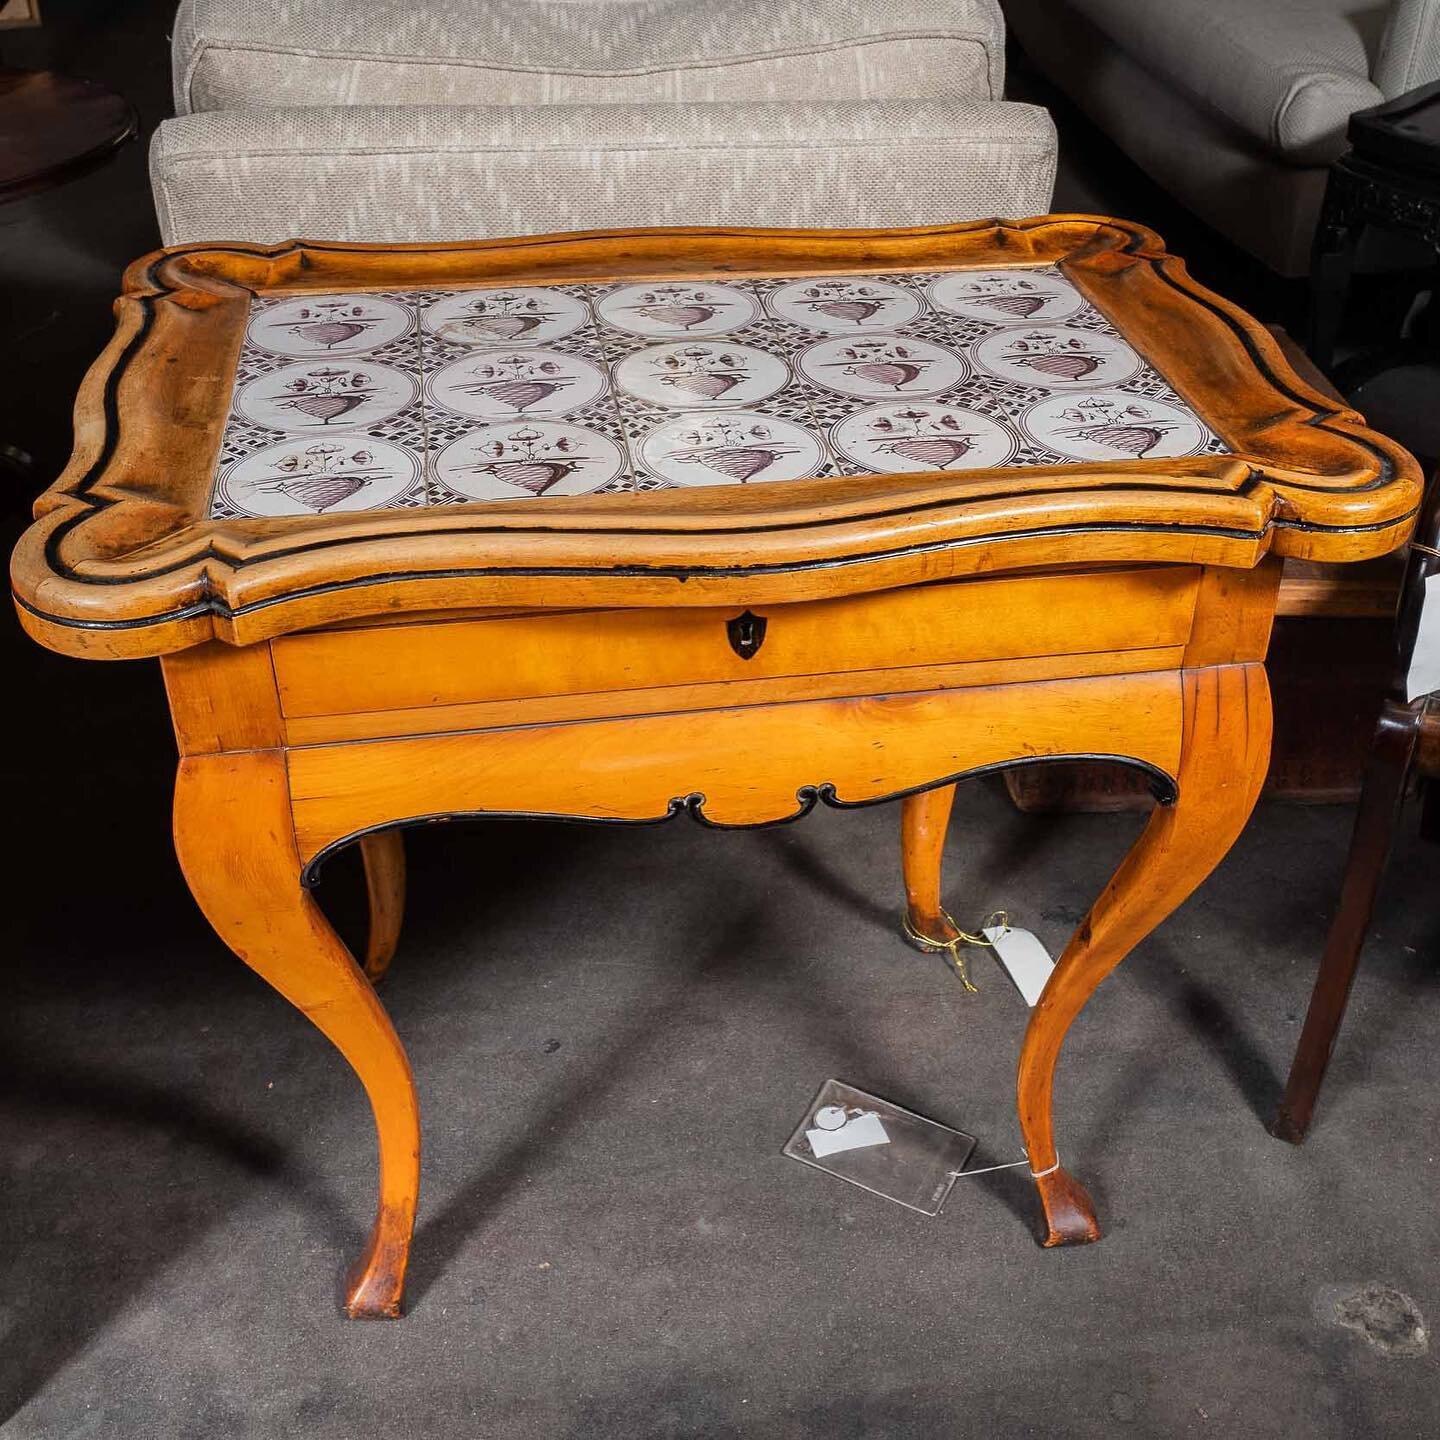 Check out this 1840&rsquo;s Northern German Rococo style fruit wood table with &quot;Kellinghus&quot; tiles that were made around 1750! Available this weekend at out #interiordesigner #pasadena warehouse reduction sale!
👉 #linkinbio 👈
.
.
.
#pasade